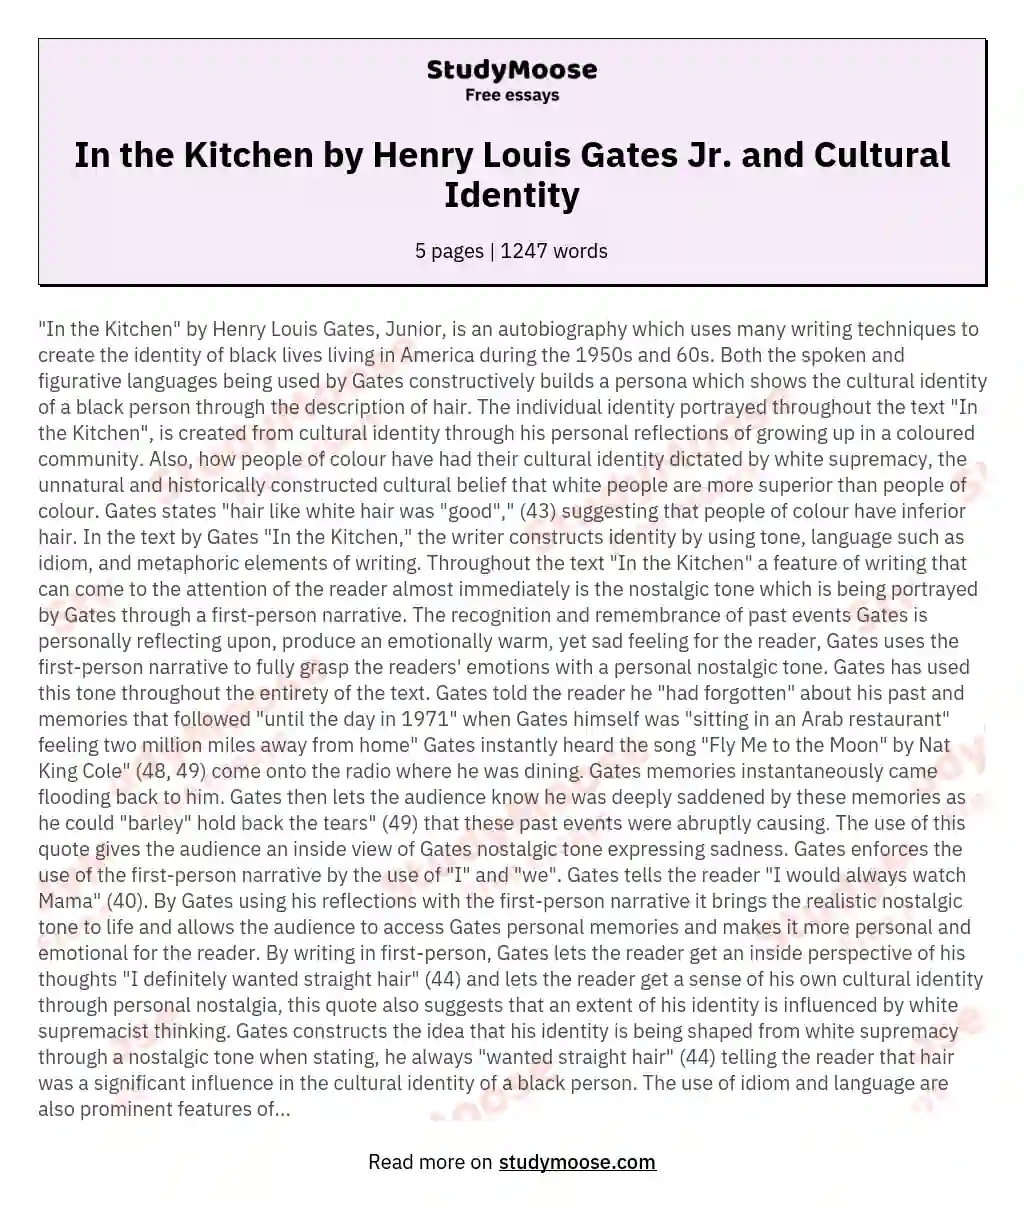 In the Kitchen by Henry Louis Gates Jr. and Cultural Identity essay